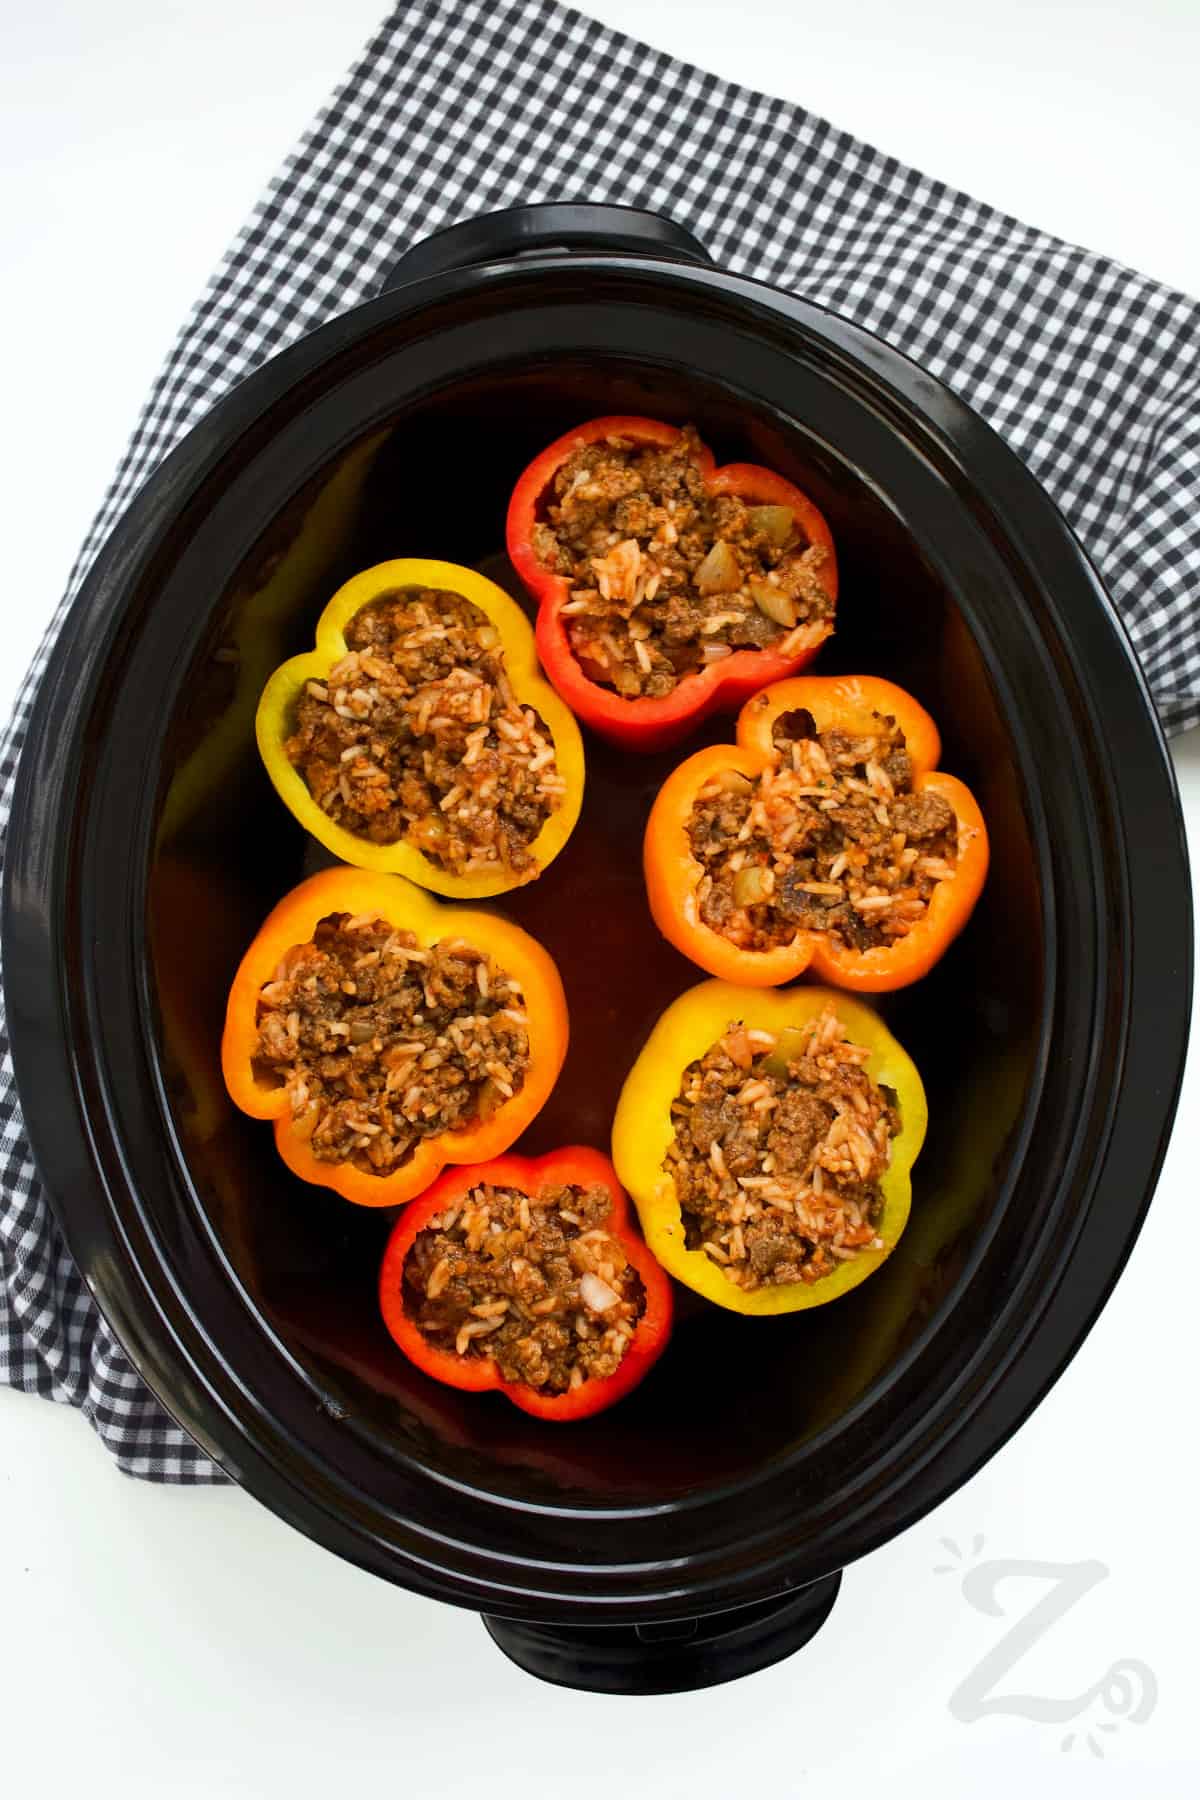 bell peppers stuffed with filling in a Crock pot to make slow cooker stuffed peppers